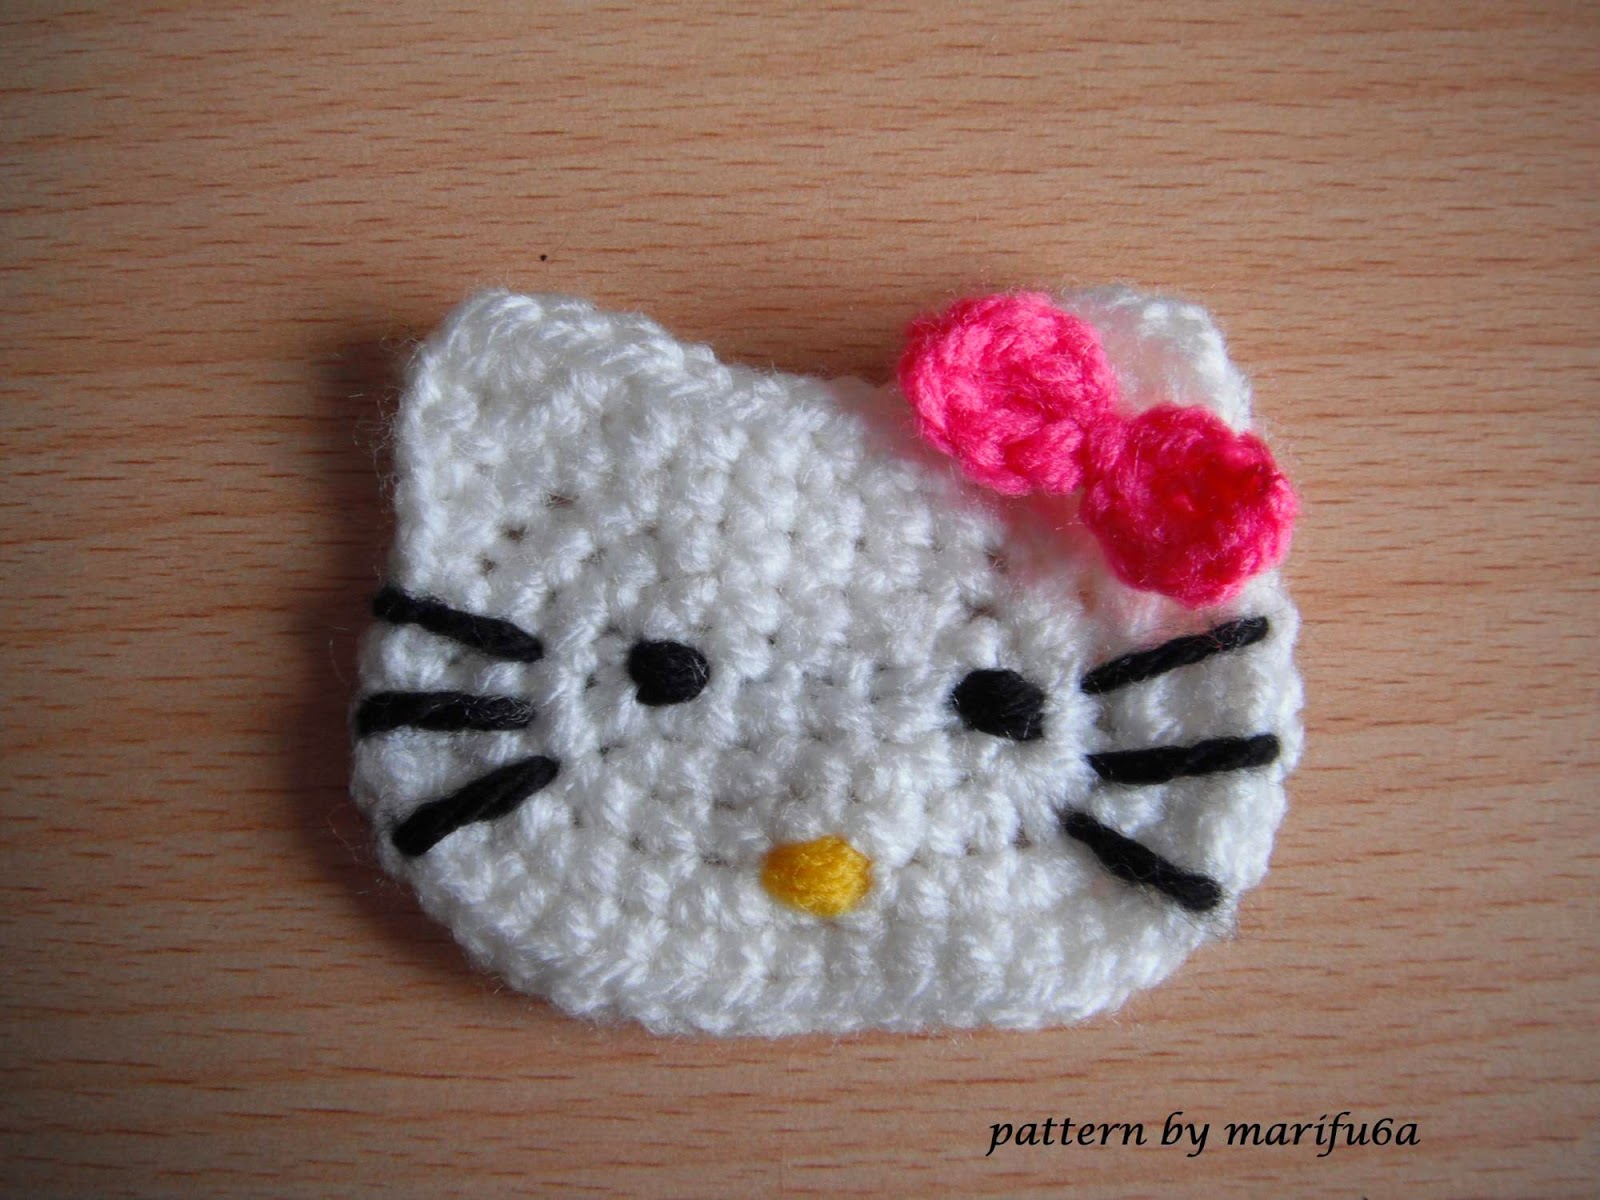 Free crochet patterns and video tutorials: how to crochet hello kitty